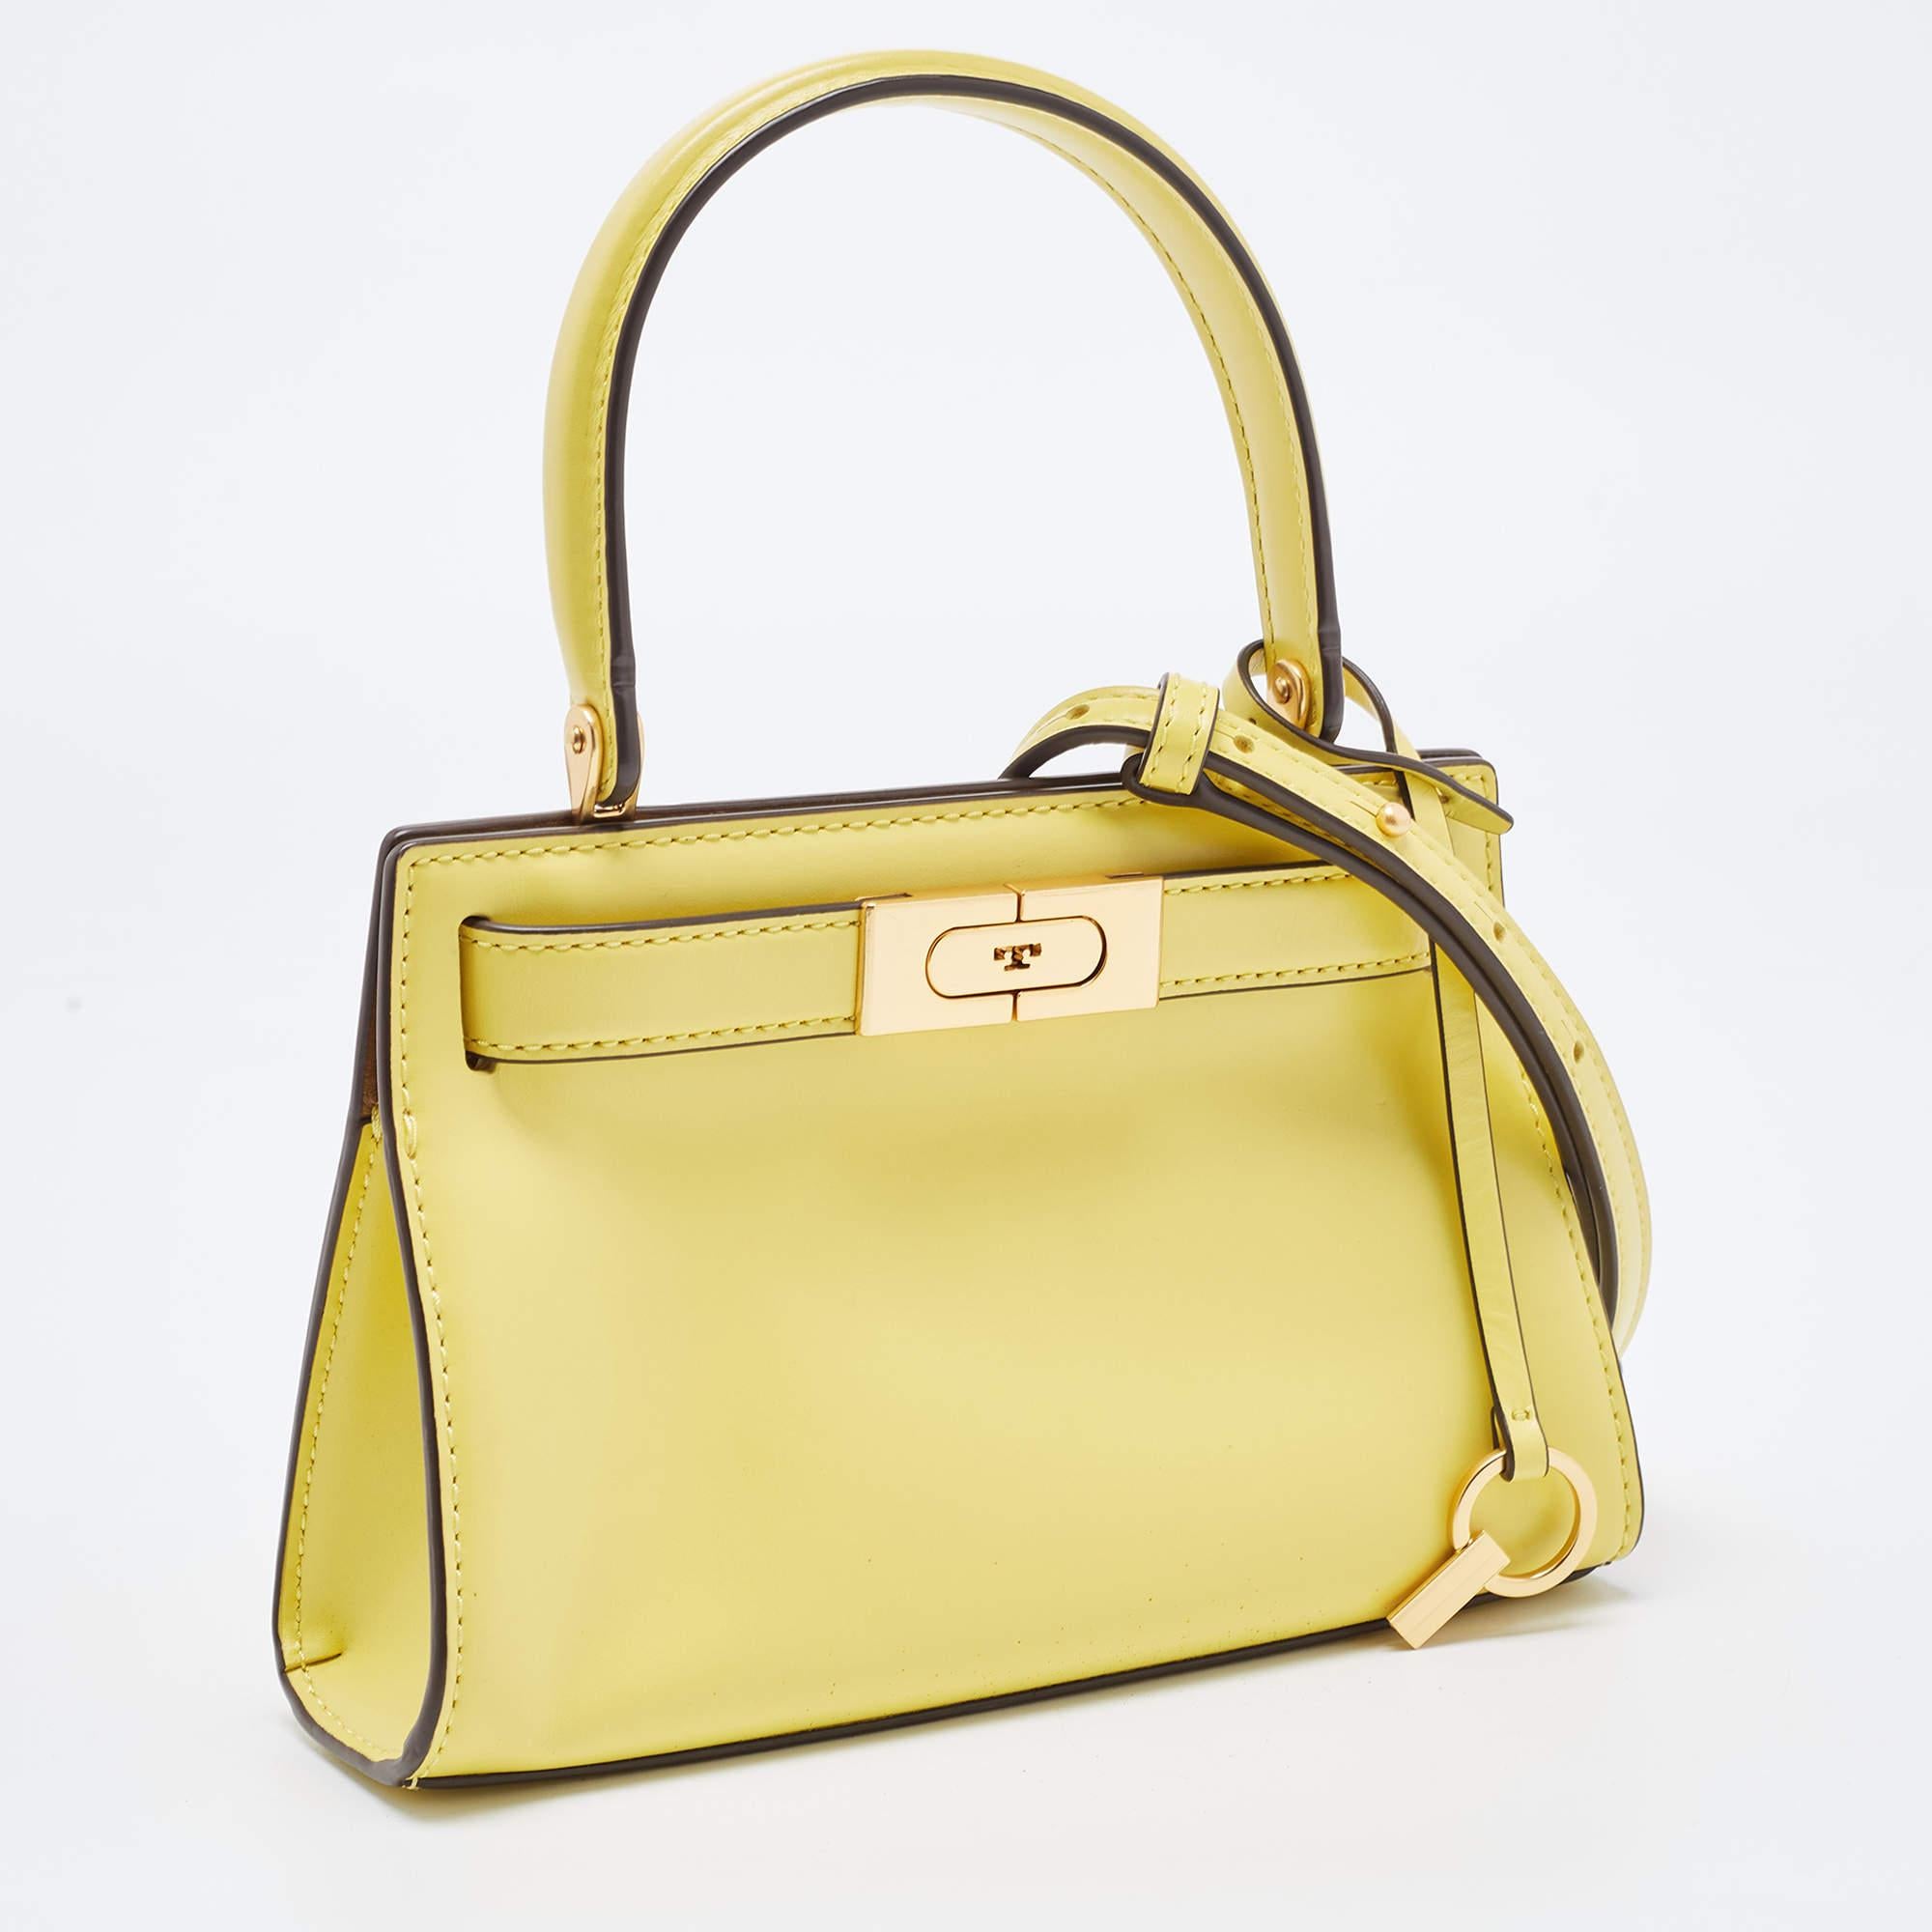 Women's Tory Burch Yellow Leather Petite Lee Radziwill Top Handle Bag For Sale